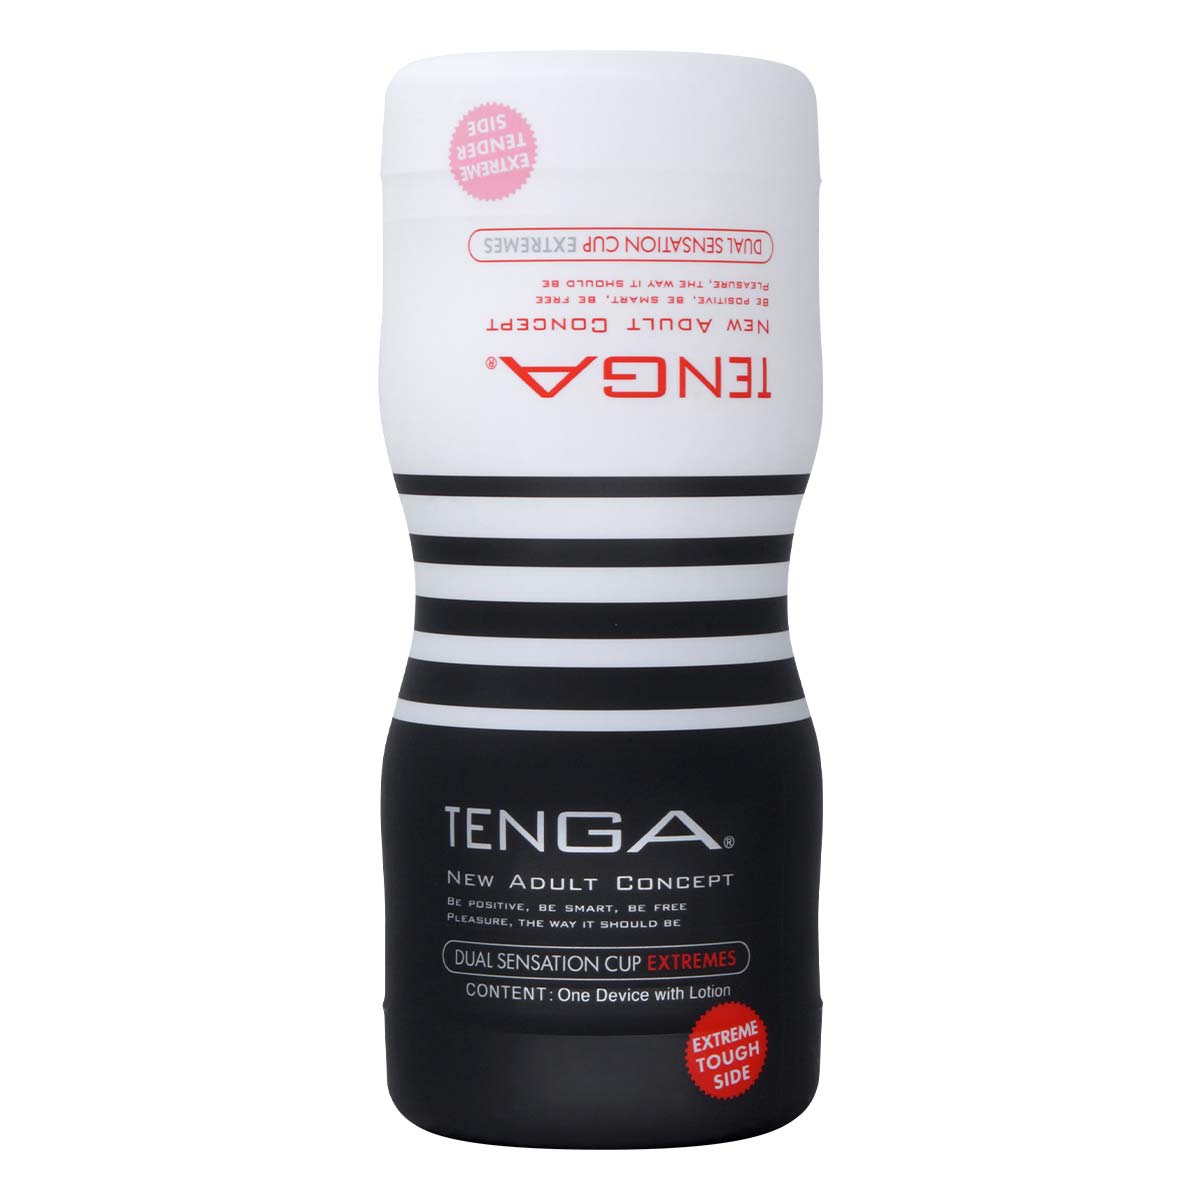 TENGA DUAL FEEL CUP 2nd Generation EXTREMES-p_2